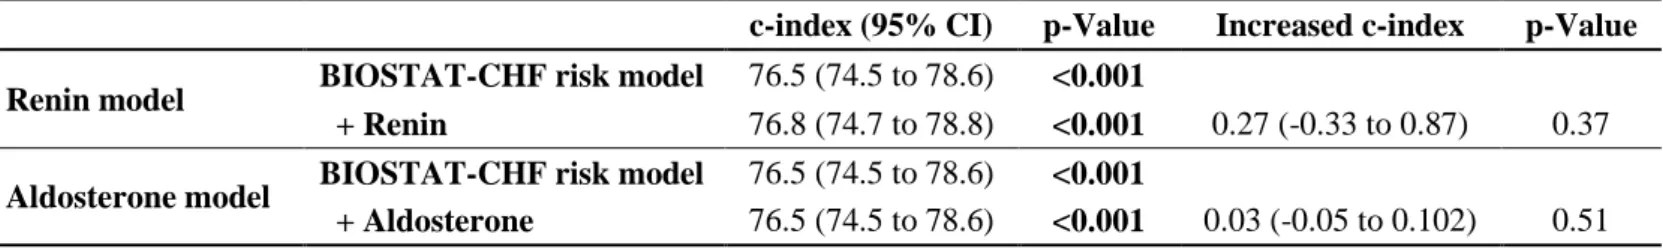 Table 4. Discrimination of Renin and Aldosterone Levels for the Primary Outcome in BIOSTAT-CHF study  c-index (95% CI)  p-Value  Increased c-index  p-Value  Renin model  BIOSTAT-CHF risk model  76.5 (74.5 to 78.6)  &lt;0.001 